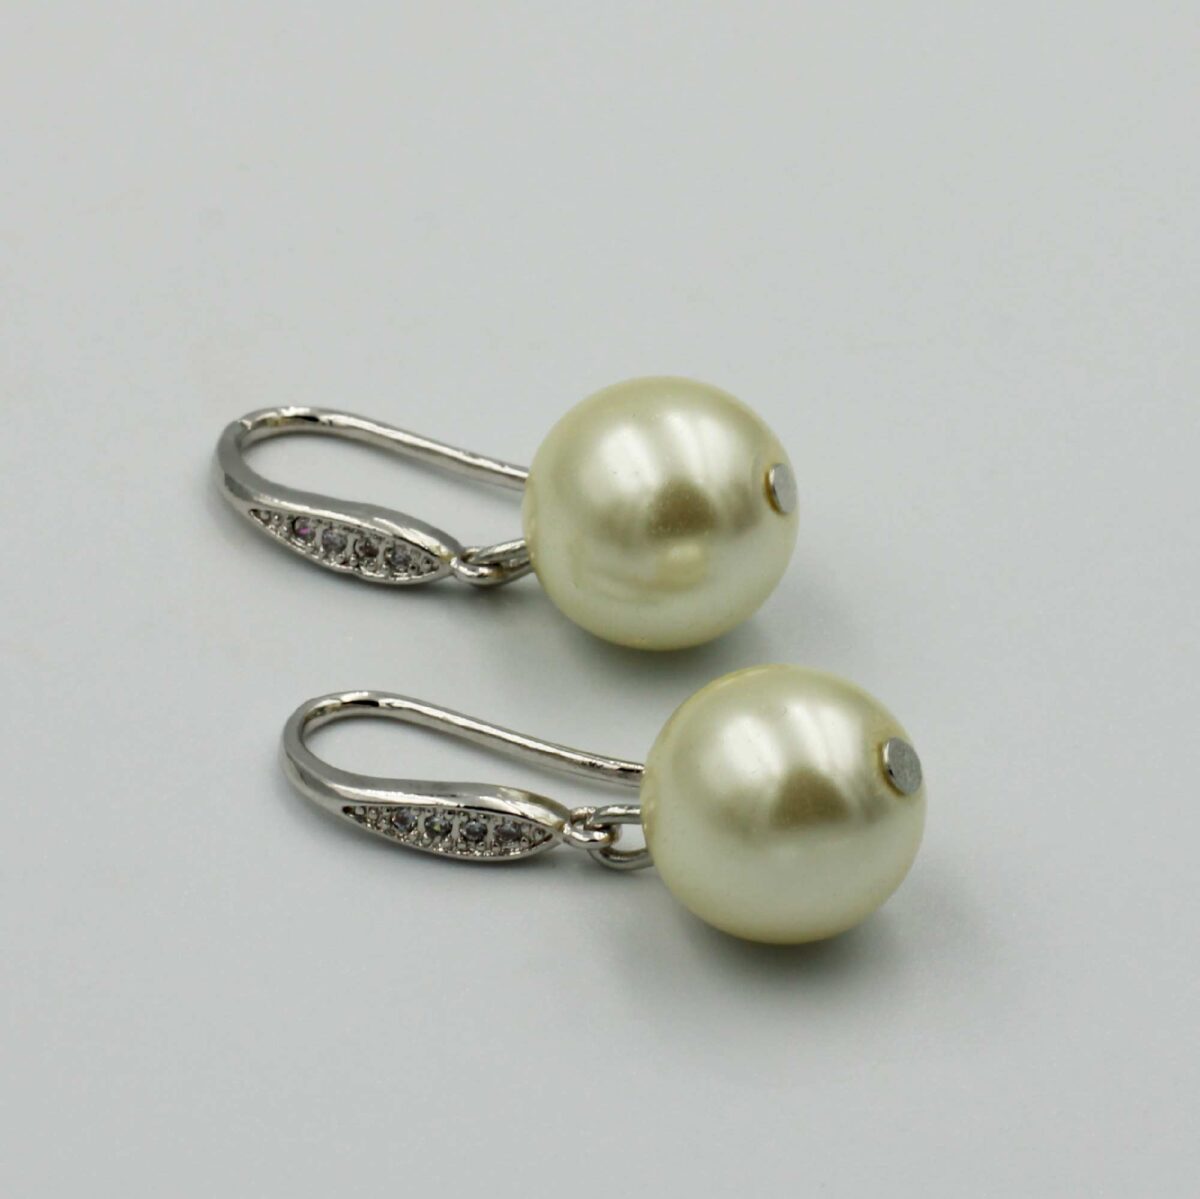 Silver Plated Earrings 925 with Glass Pearl